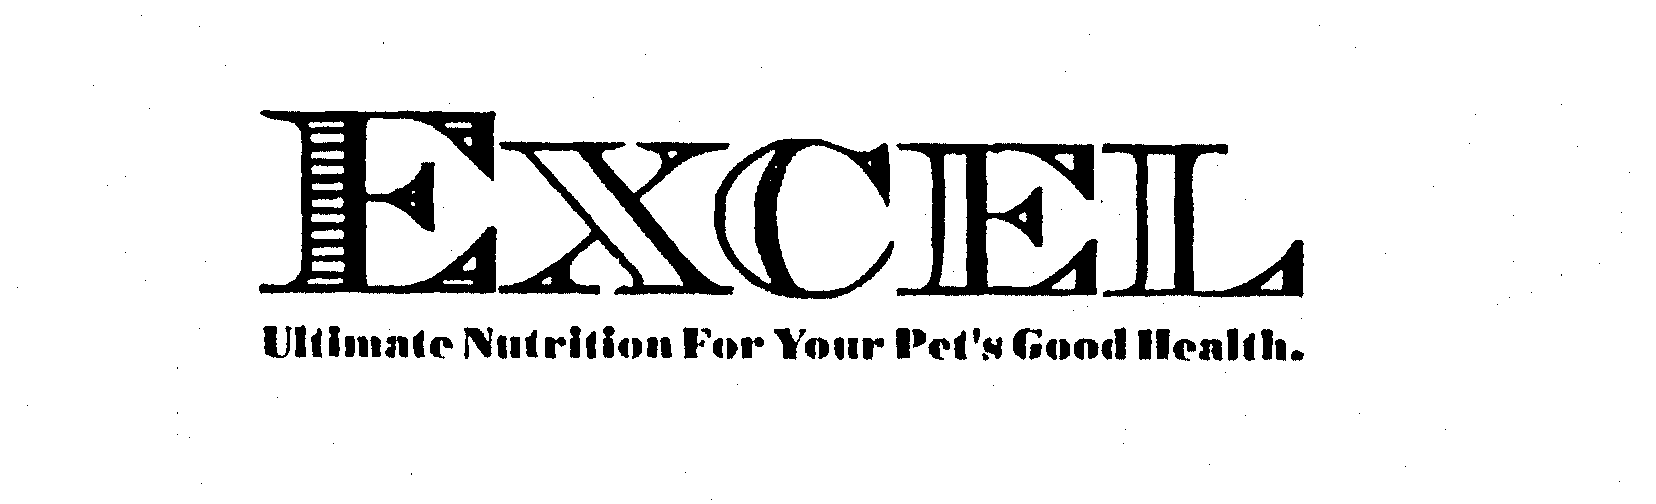  EXCEL ULTIMATE NUTRITION FOR YOUR PET'SGOOD HEALTH.